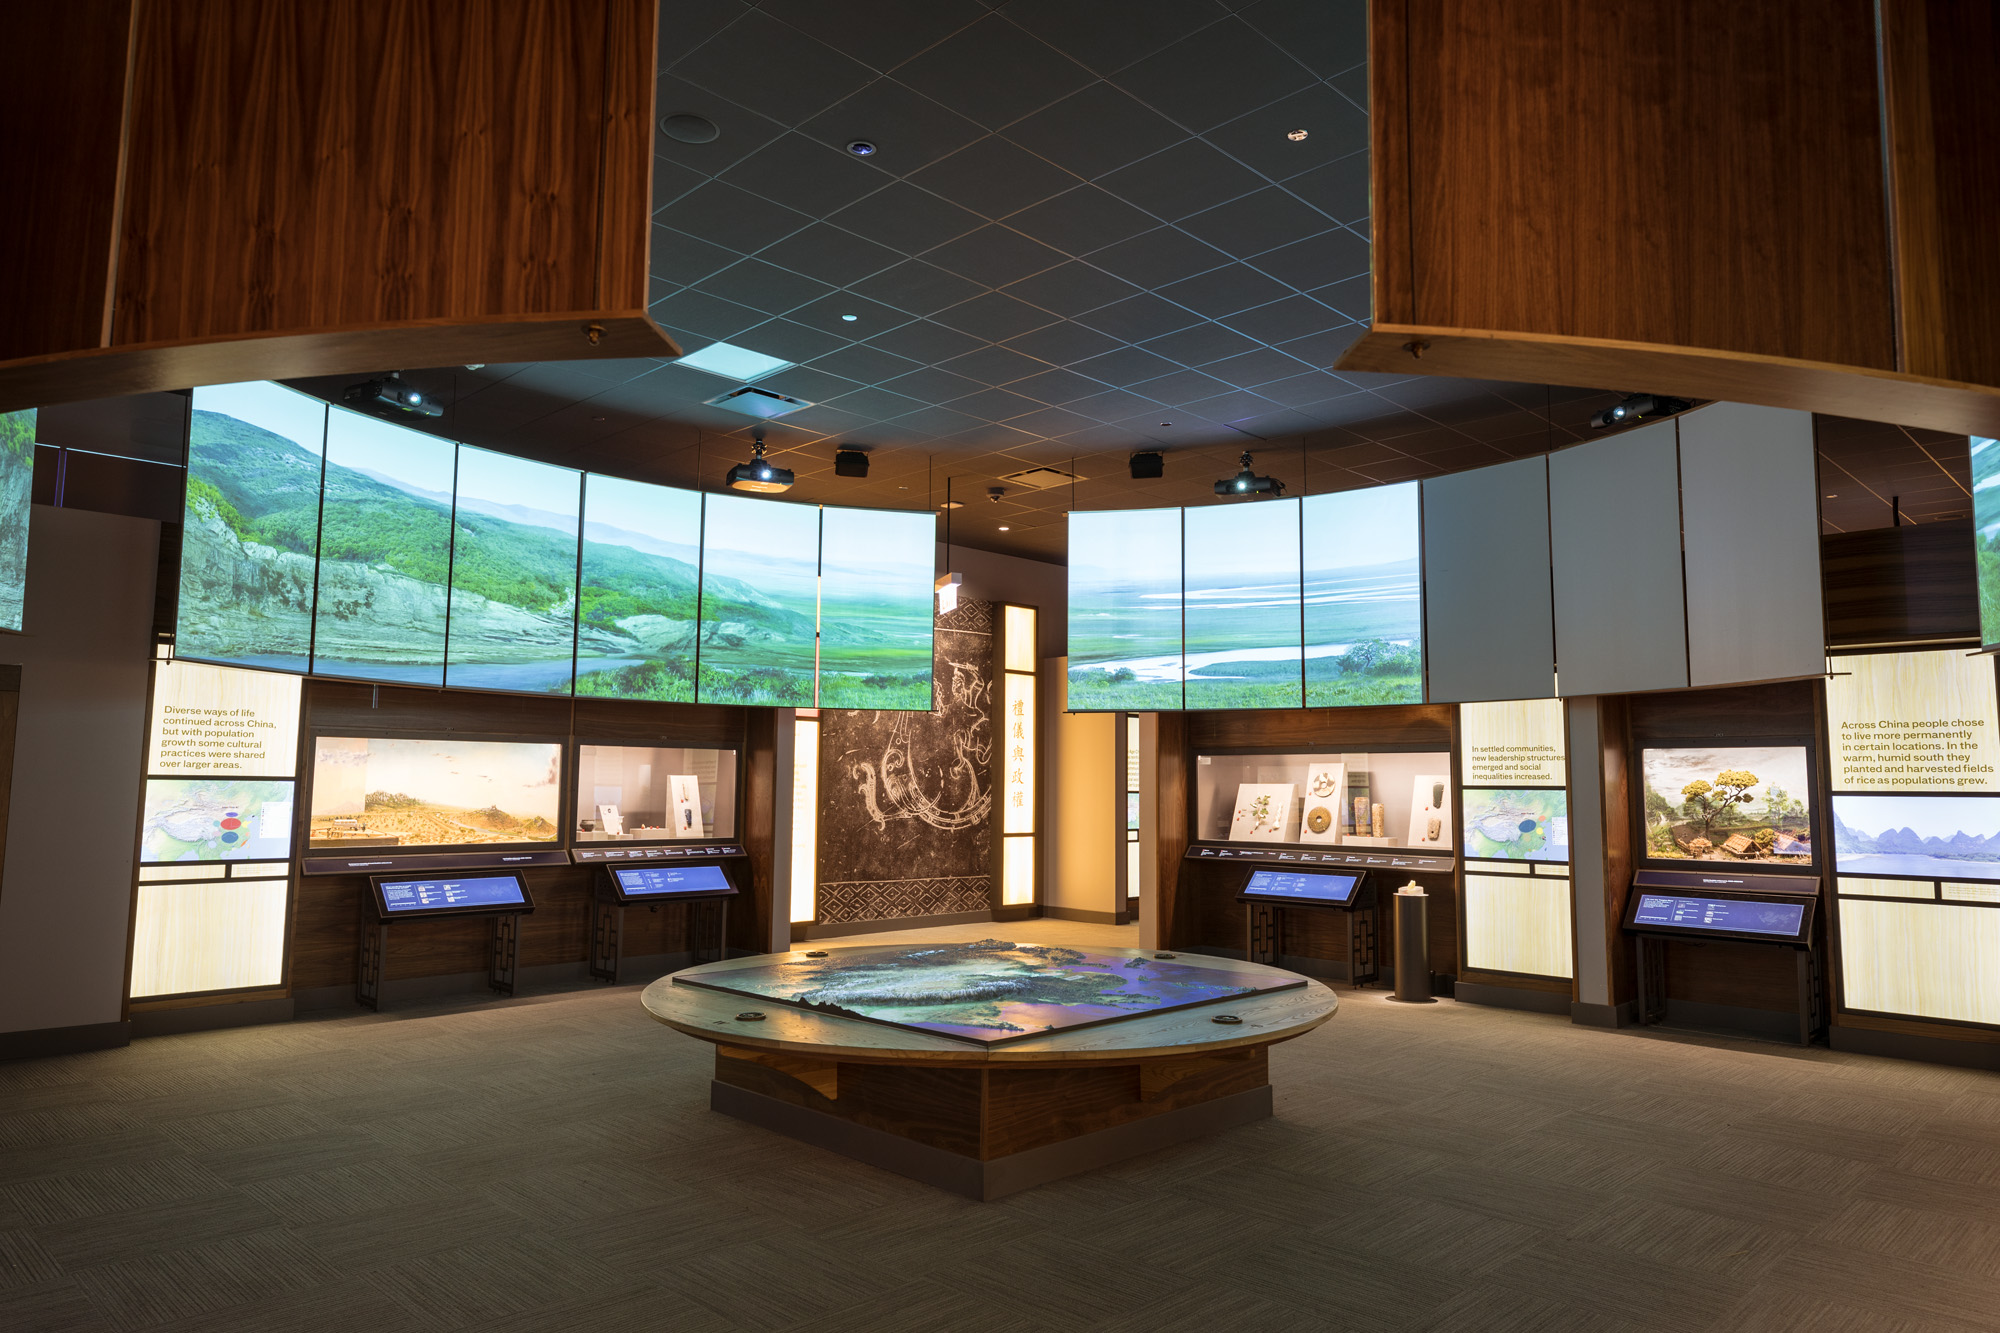 The first gallery of the Cyrus Tang Hall of China, with a map table in the foreground and a large circle of video screens above the exhibition display cases.